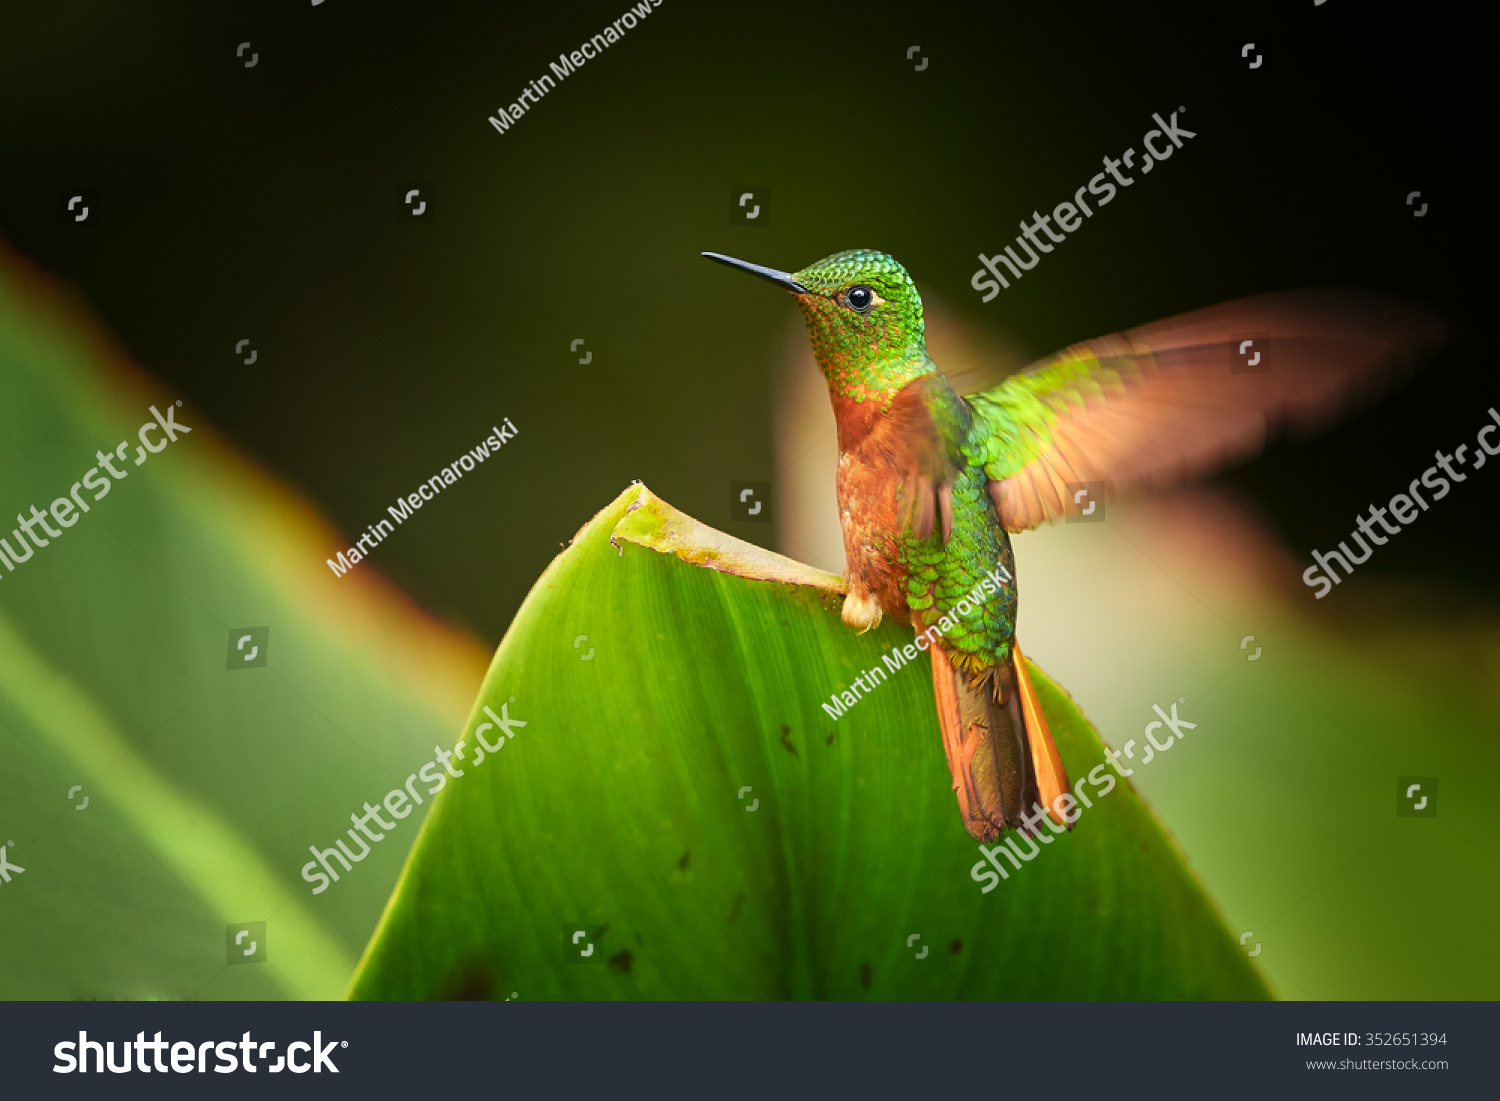 Colorful rufous and shining green hummingbirds Boissonneaua matthewsii Chestnut-breasted Coronet landing on top of green leaf ,outstretched wings, staring to camera.  Blurred dark green background.   #352651394